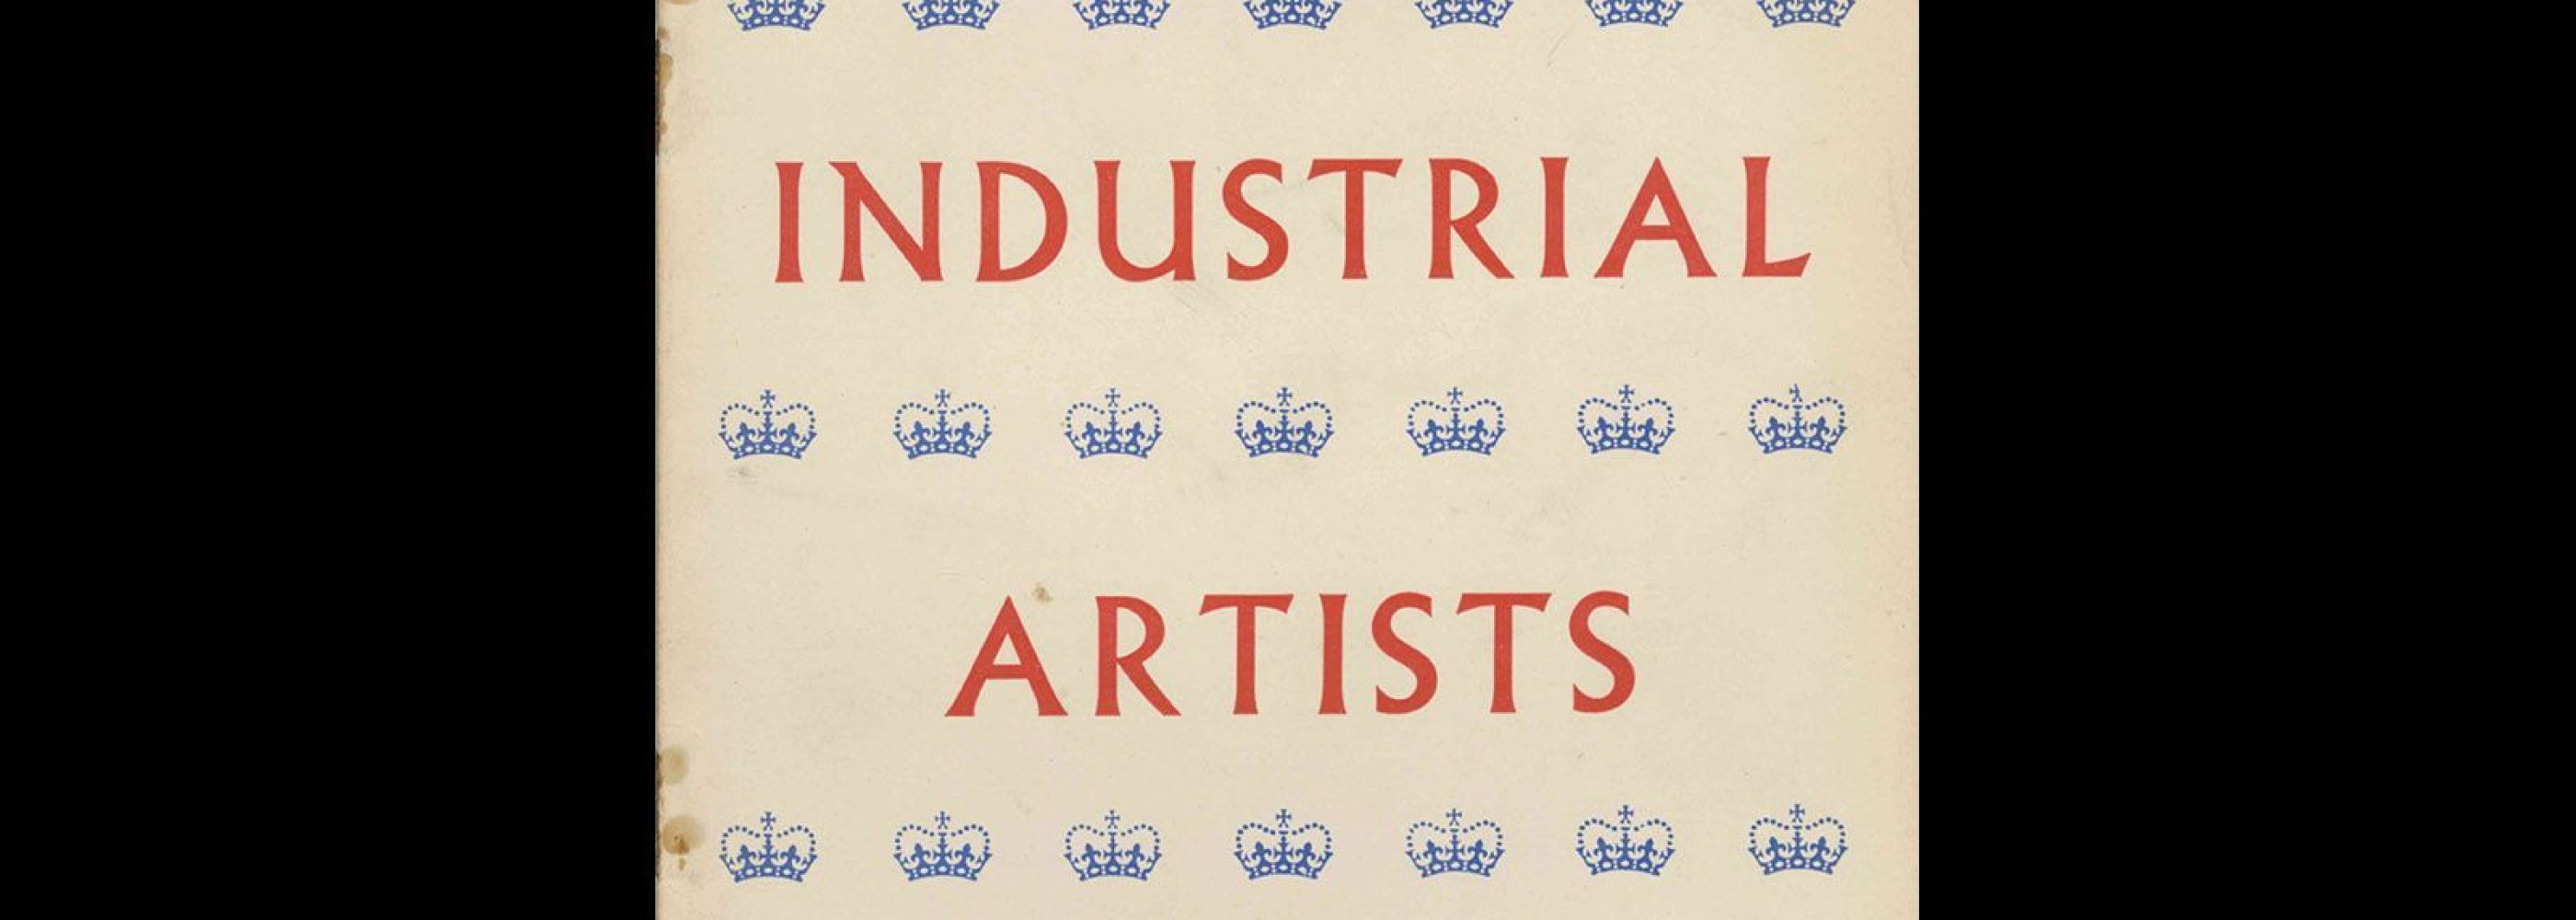 Society of Industrial Artists, 33, June 1953